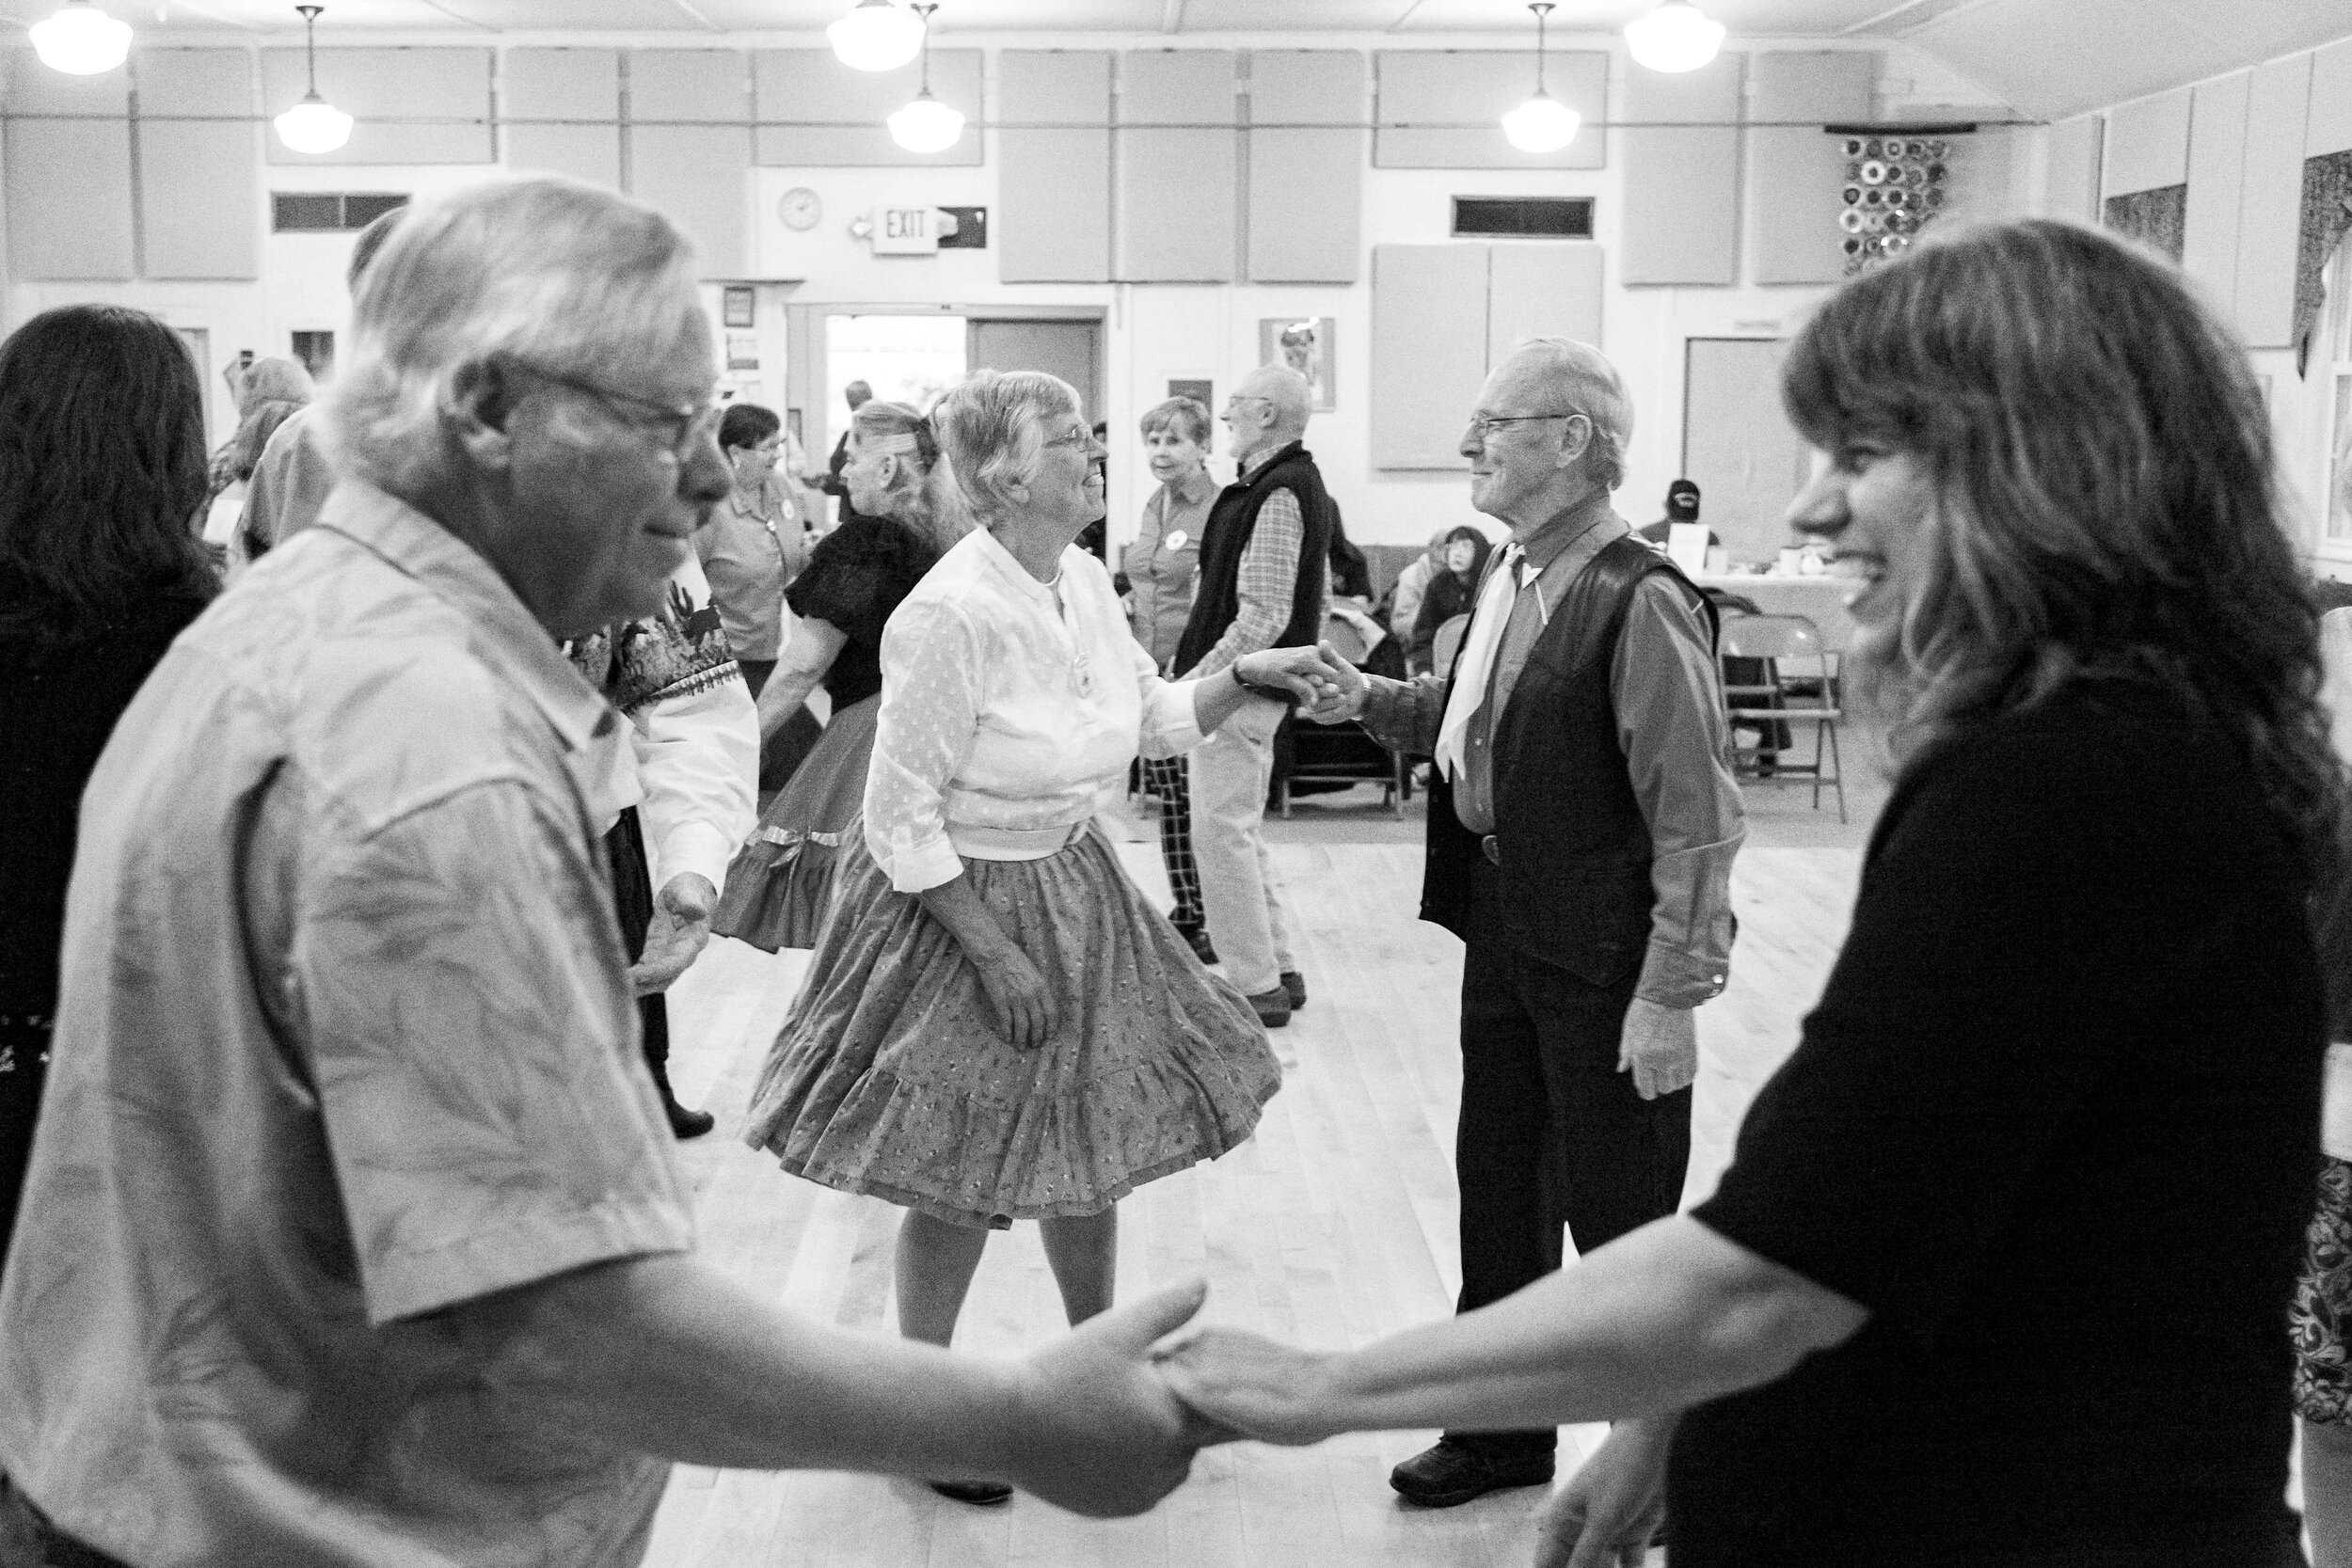  Arnie Williams, center-right, and Denise Hark, center-left, join their fellow dancers in bowing to their partners at the conclusion of a song on Sunday, October 6th 2019 at the first gathering of the Barre Area Squares at Capital City Grange in Berl